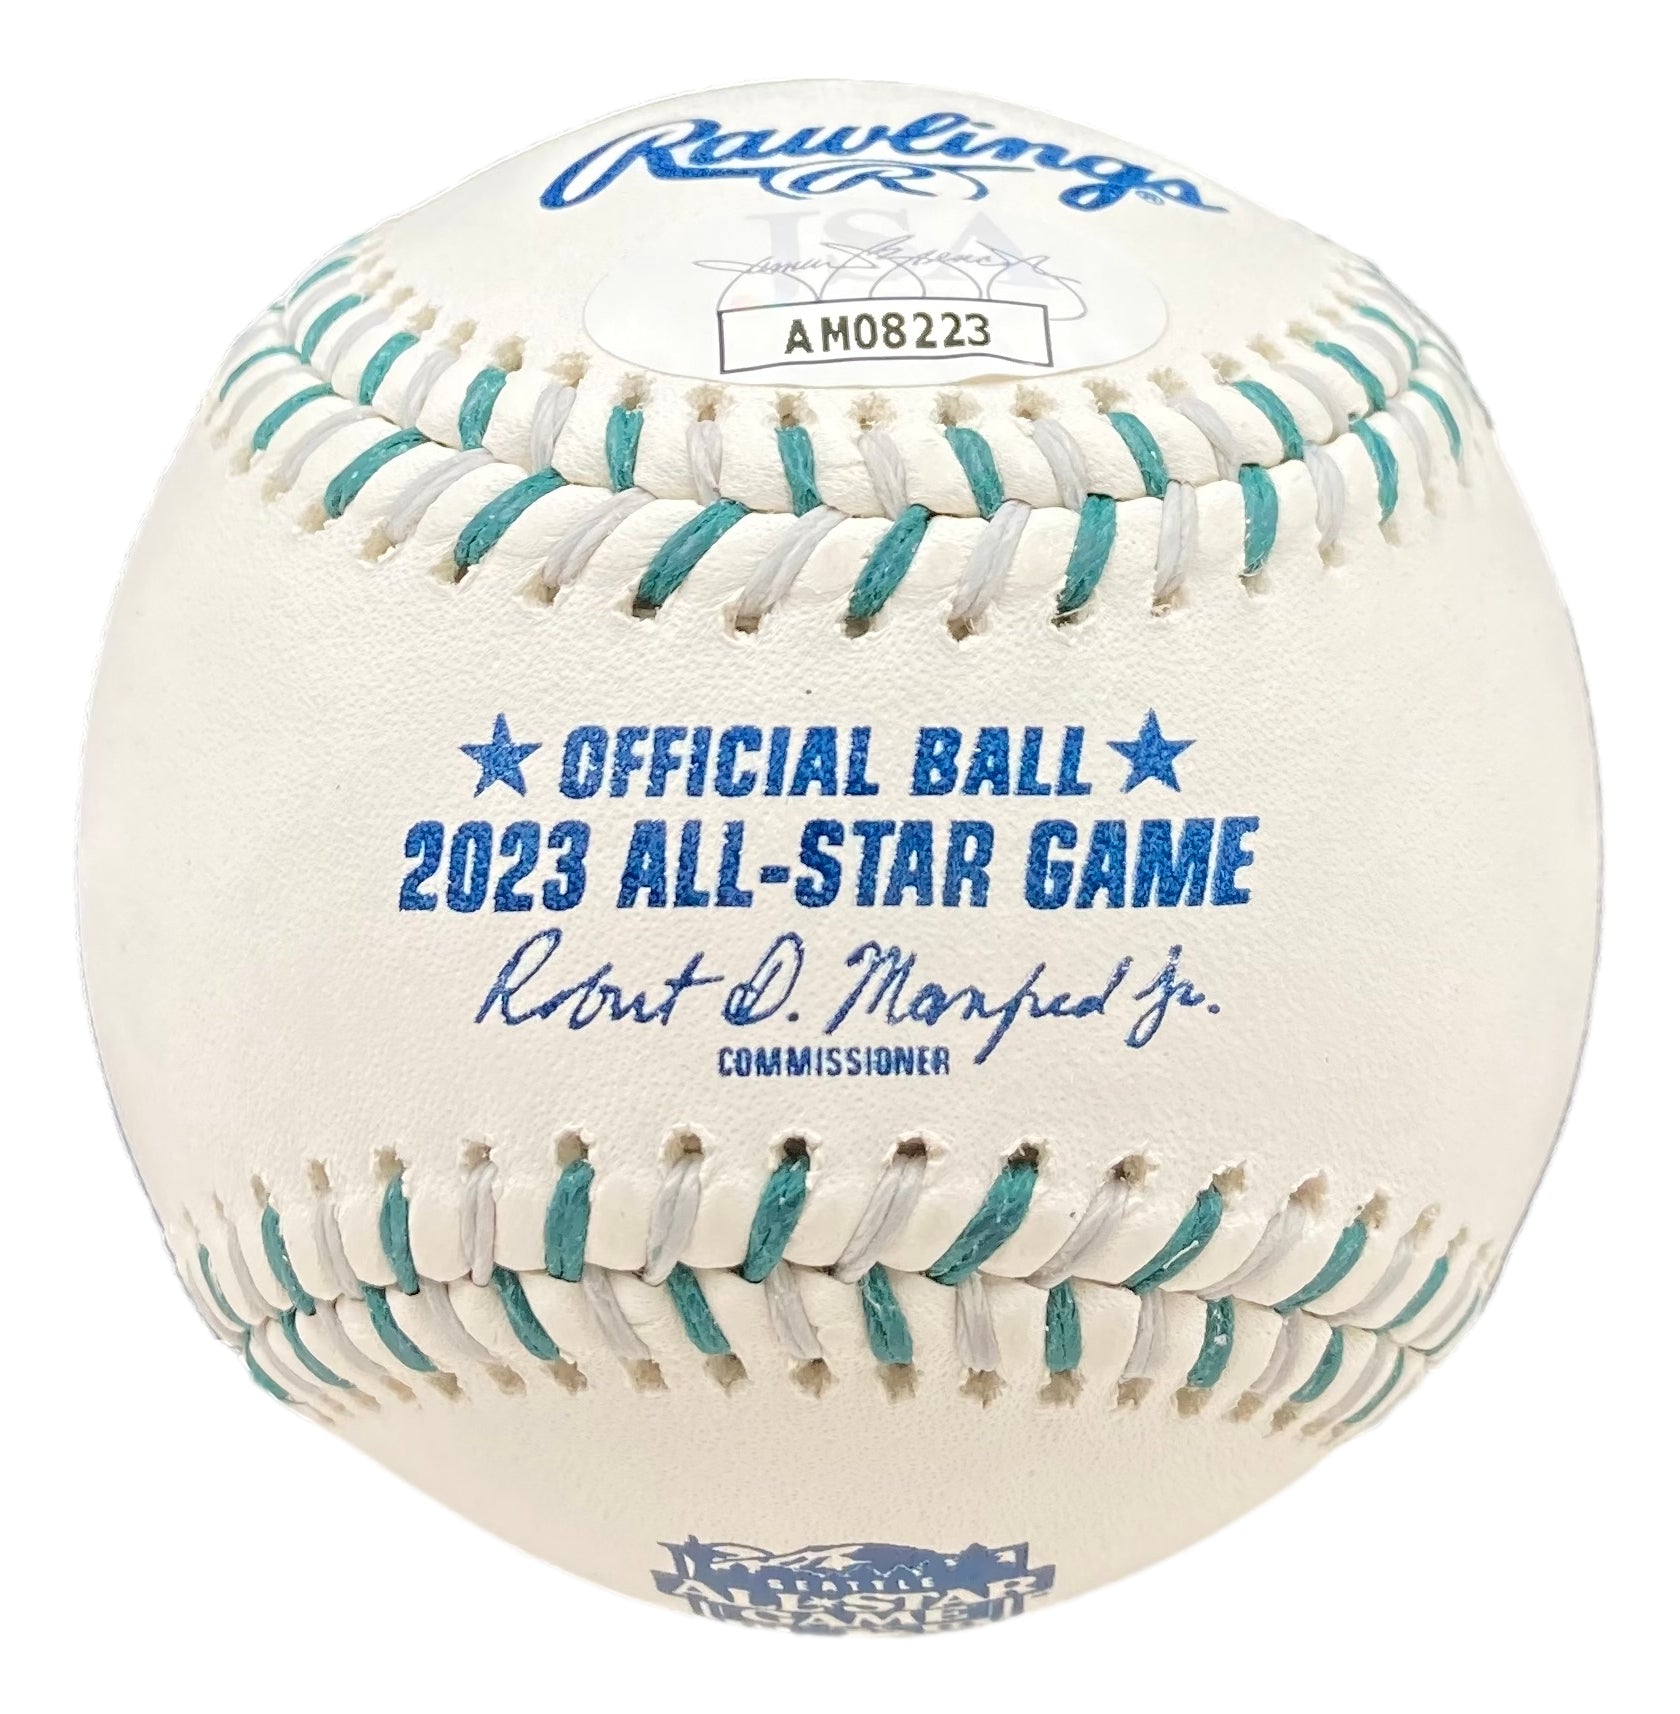 Mookie Betts Los Angeles Dodgers Autographed 2023 MLB All-Star Game Logo Baseball